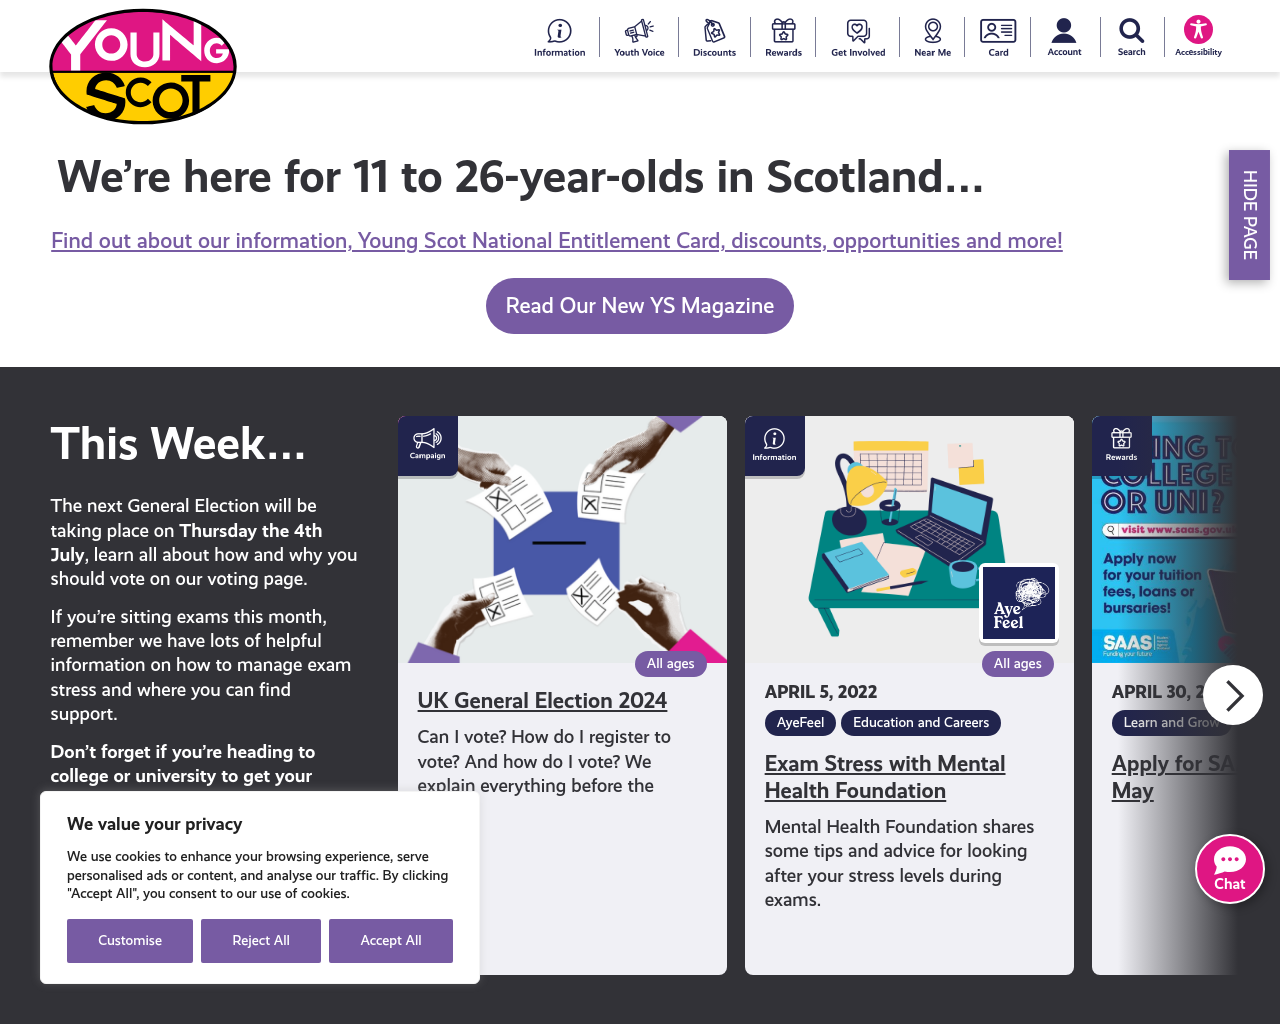 youngscot.org